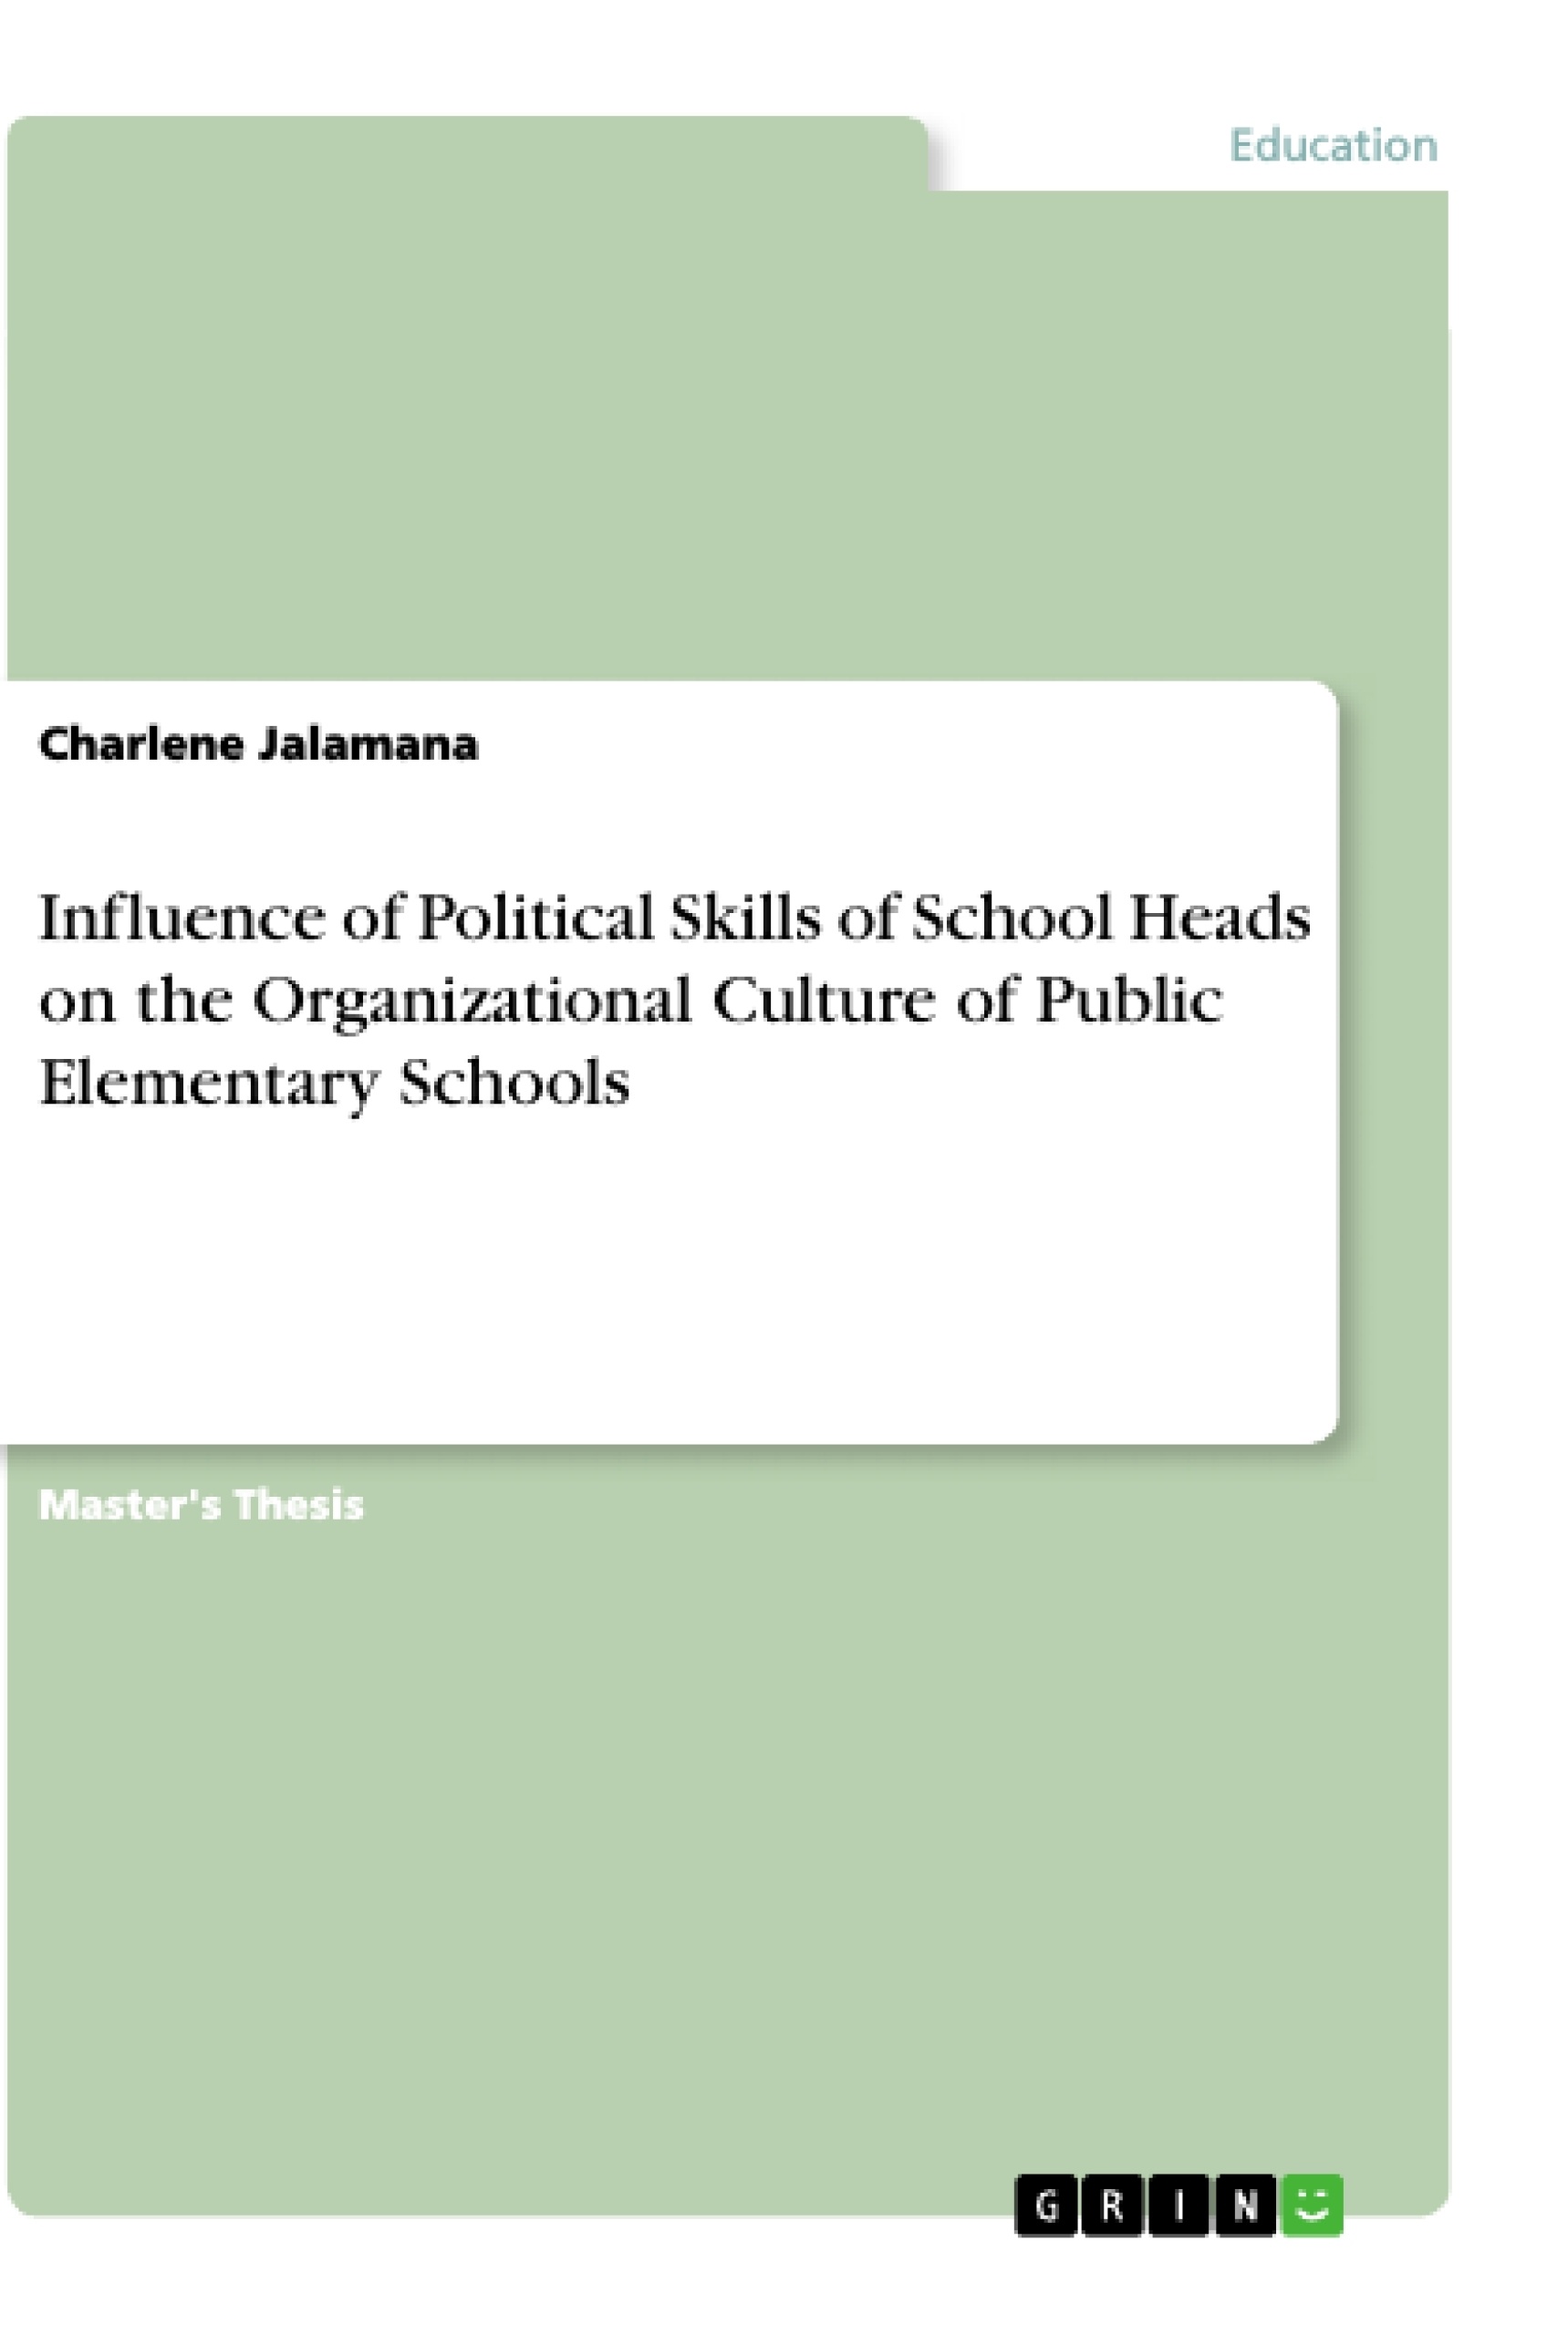 Título: Influence of Political Skills of School Heads on the Organizational Culture of Public Elementary Schools